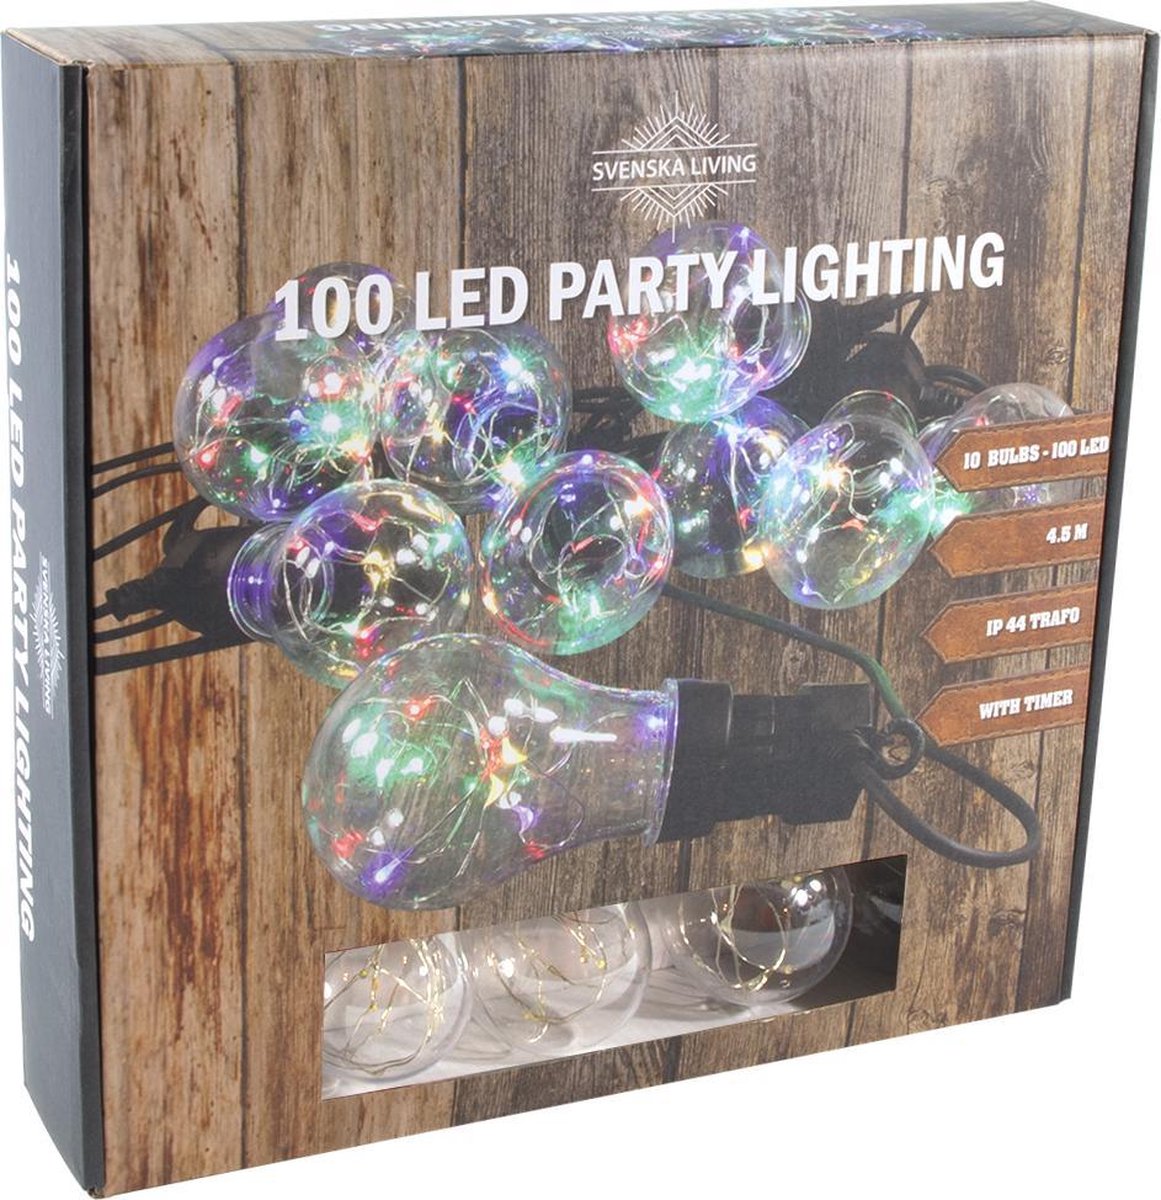 Partylight X10 100Multiled Ip44 Timer 3M 450Cm